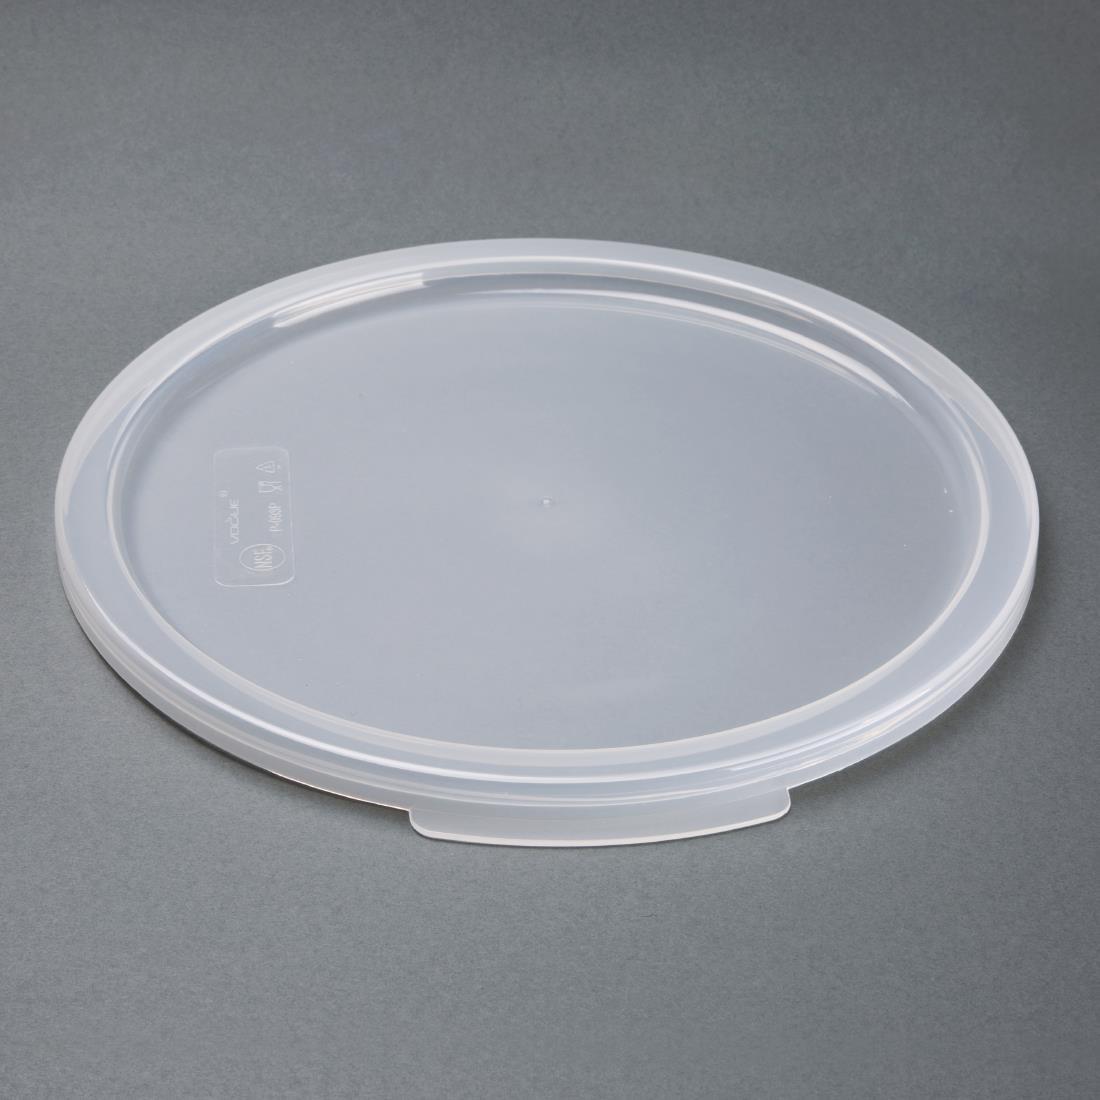 Lid for Vogue Round Food Storage Container 7.5Ltr - DJ963  - 1